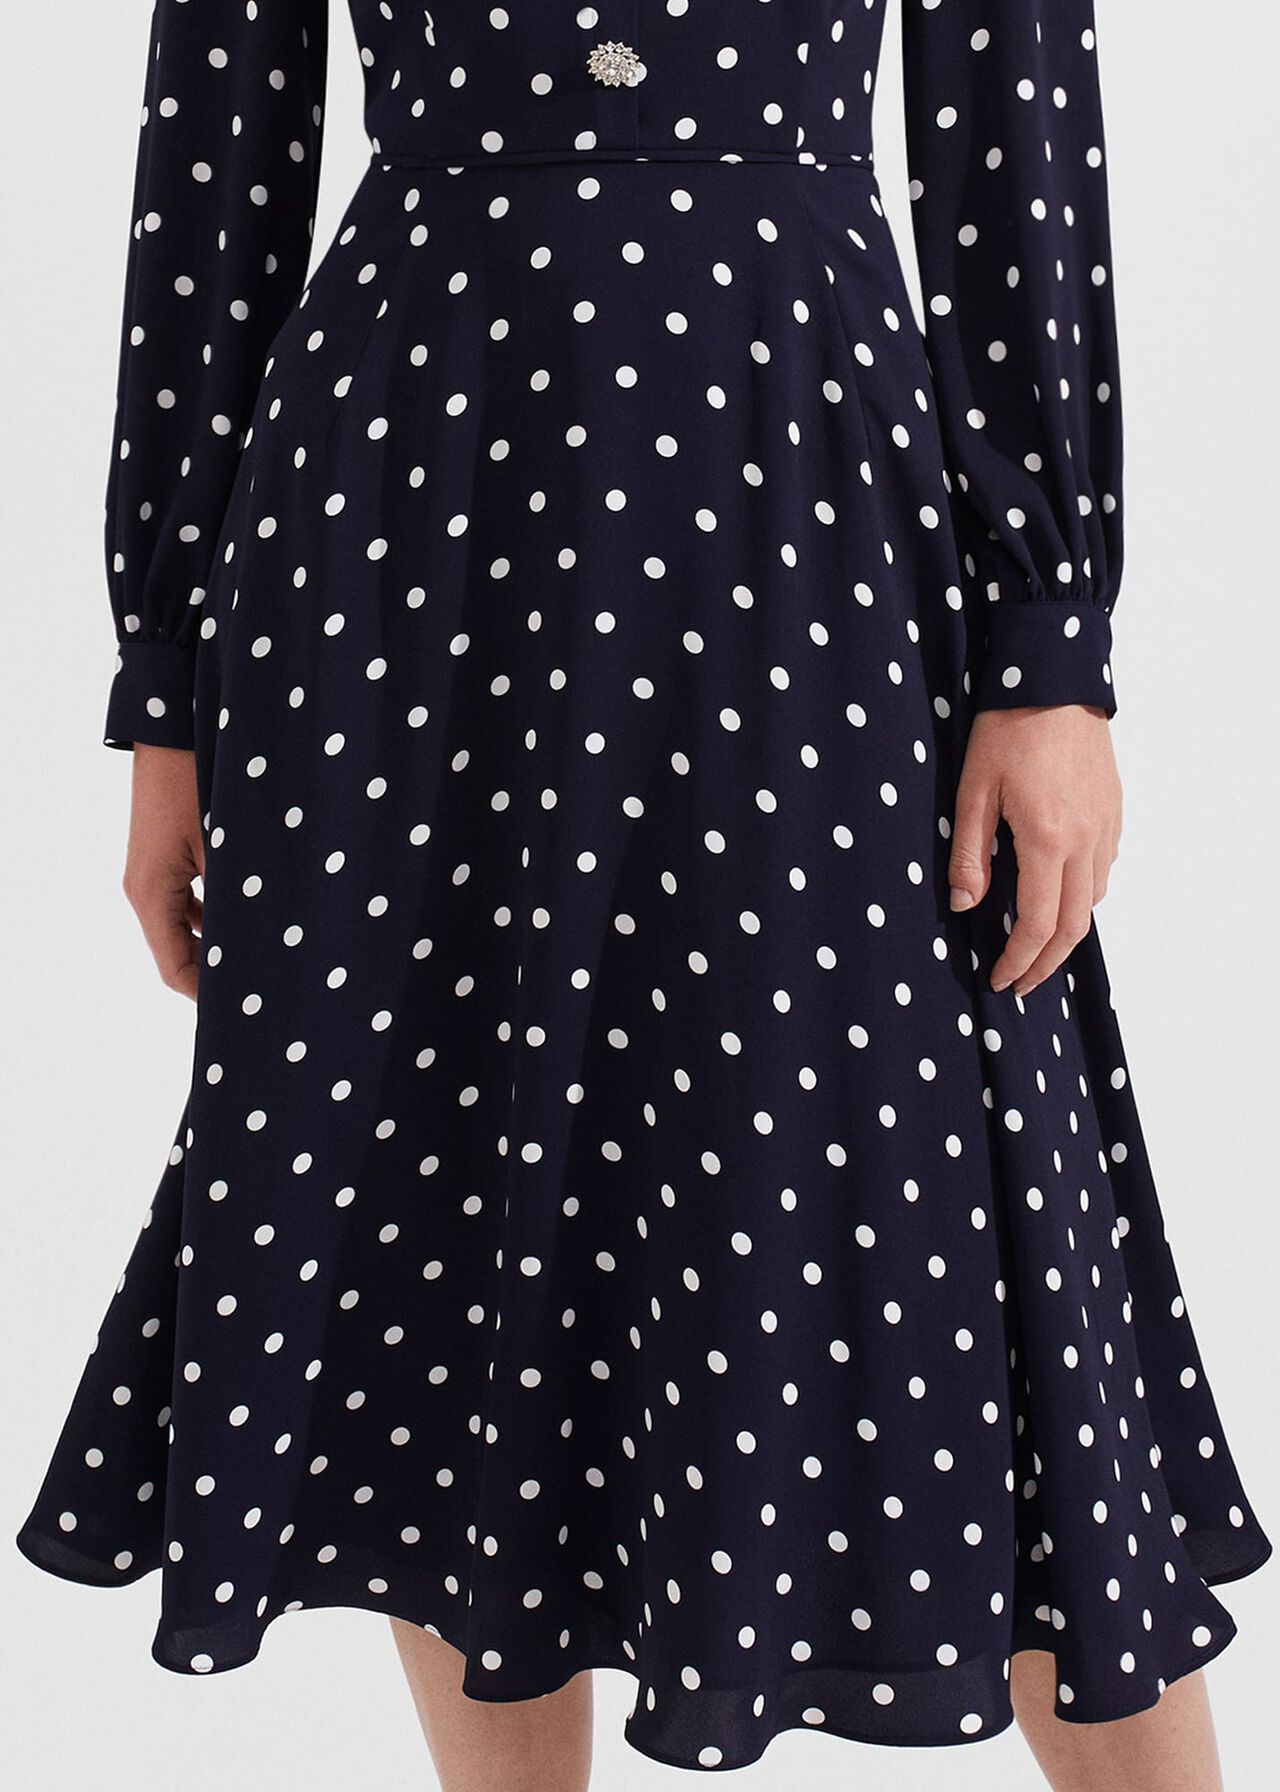 Ayla Spot Fit And Flare Dress, Navy Ivory, hi-res